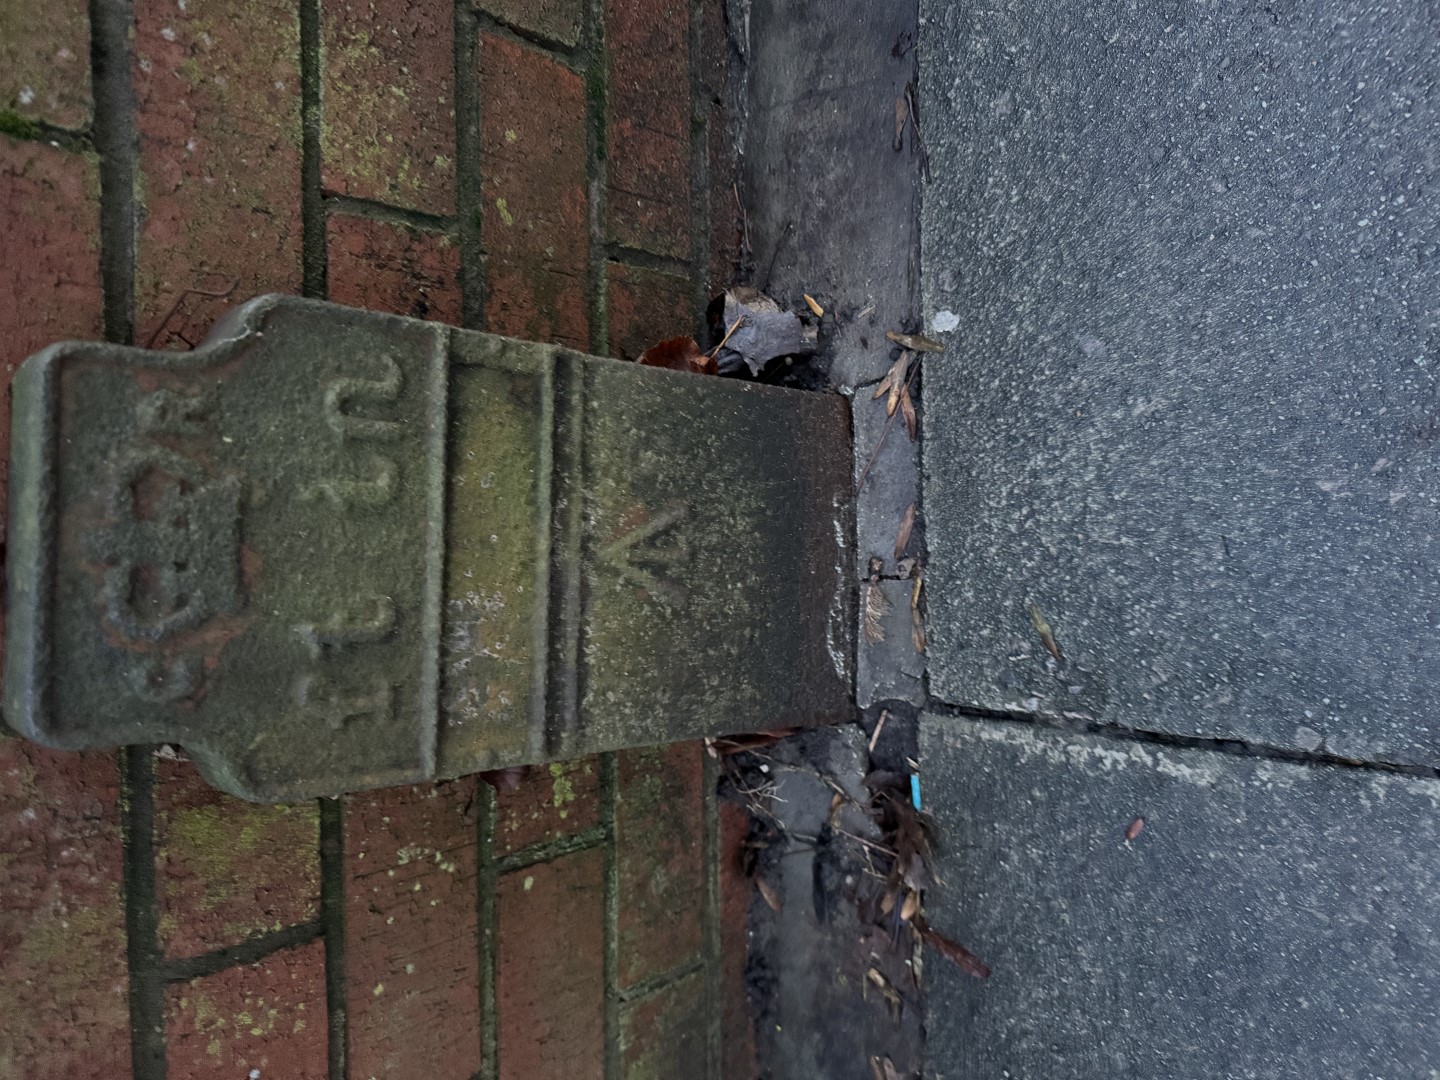 Telegraph cable marker post at 250 Scarisbrick New Road, Southport by David Gallacher 